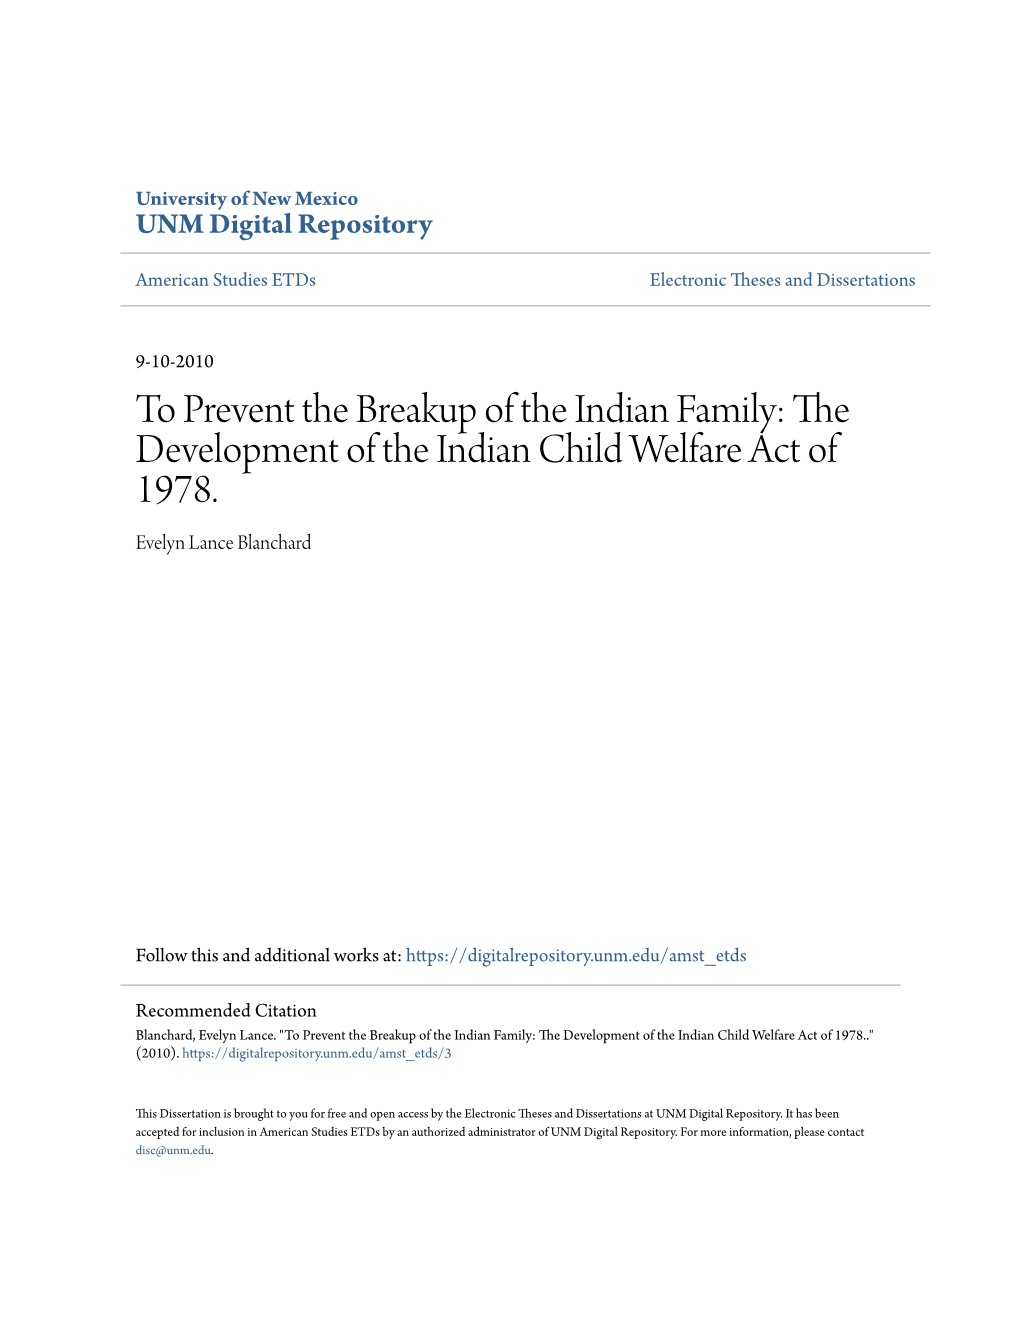 The Development of the Indian Child Welfare Act of 1978. Evelyn Lance Blanchard